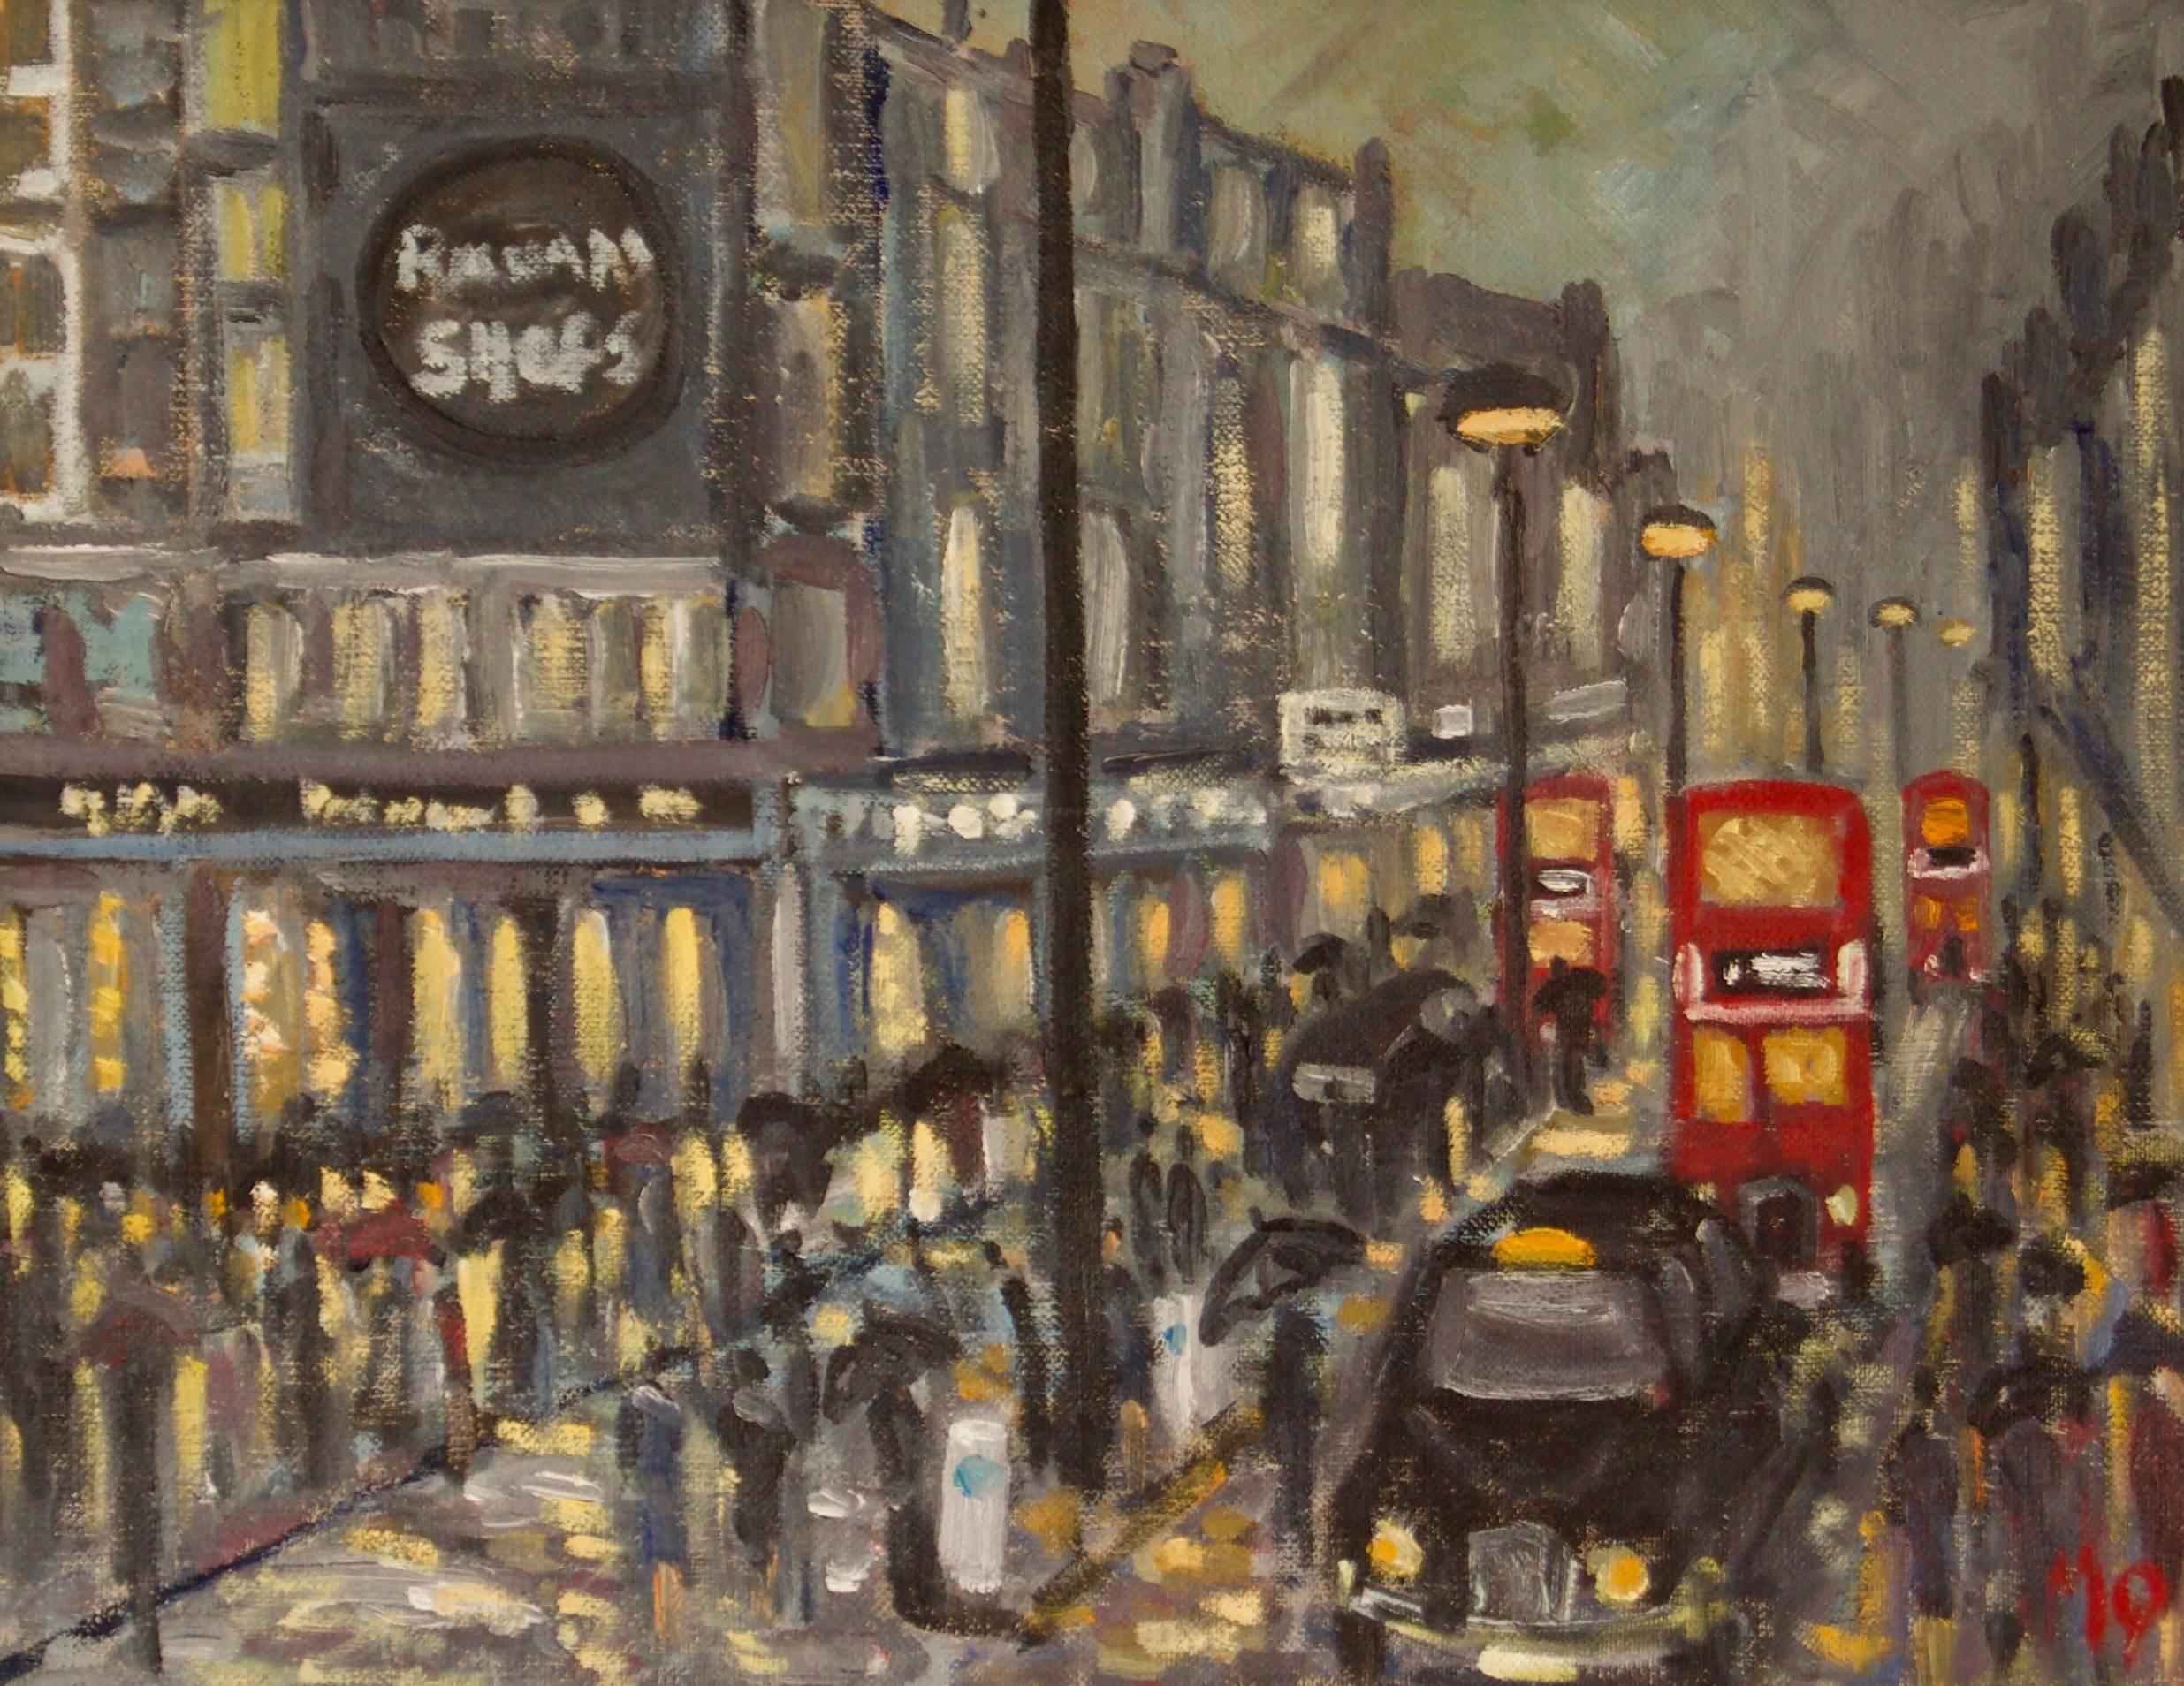 Michael Quirke Landscape Painting - Rainy Night Shopping in London - Late 20th Century Impressionist Piece by Quirke